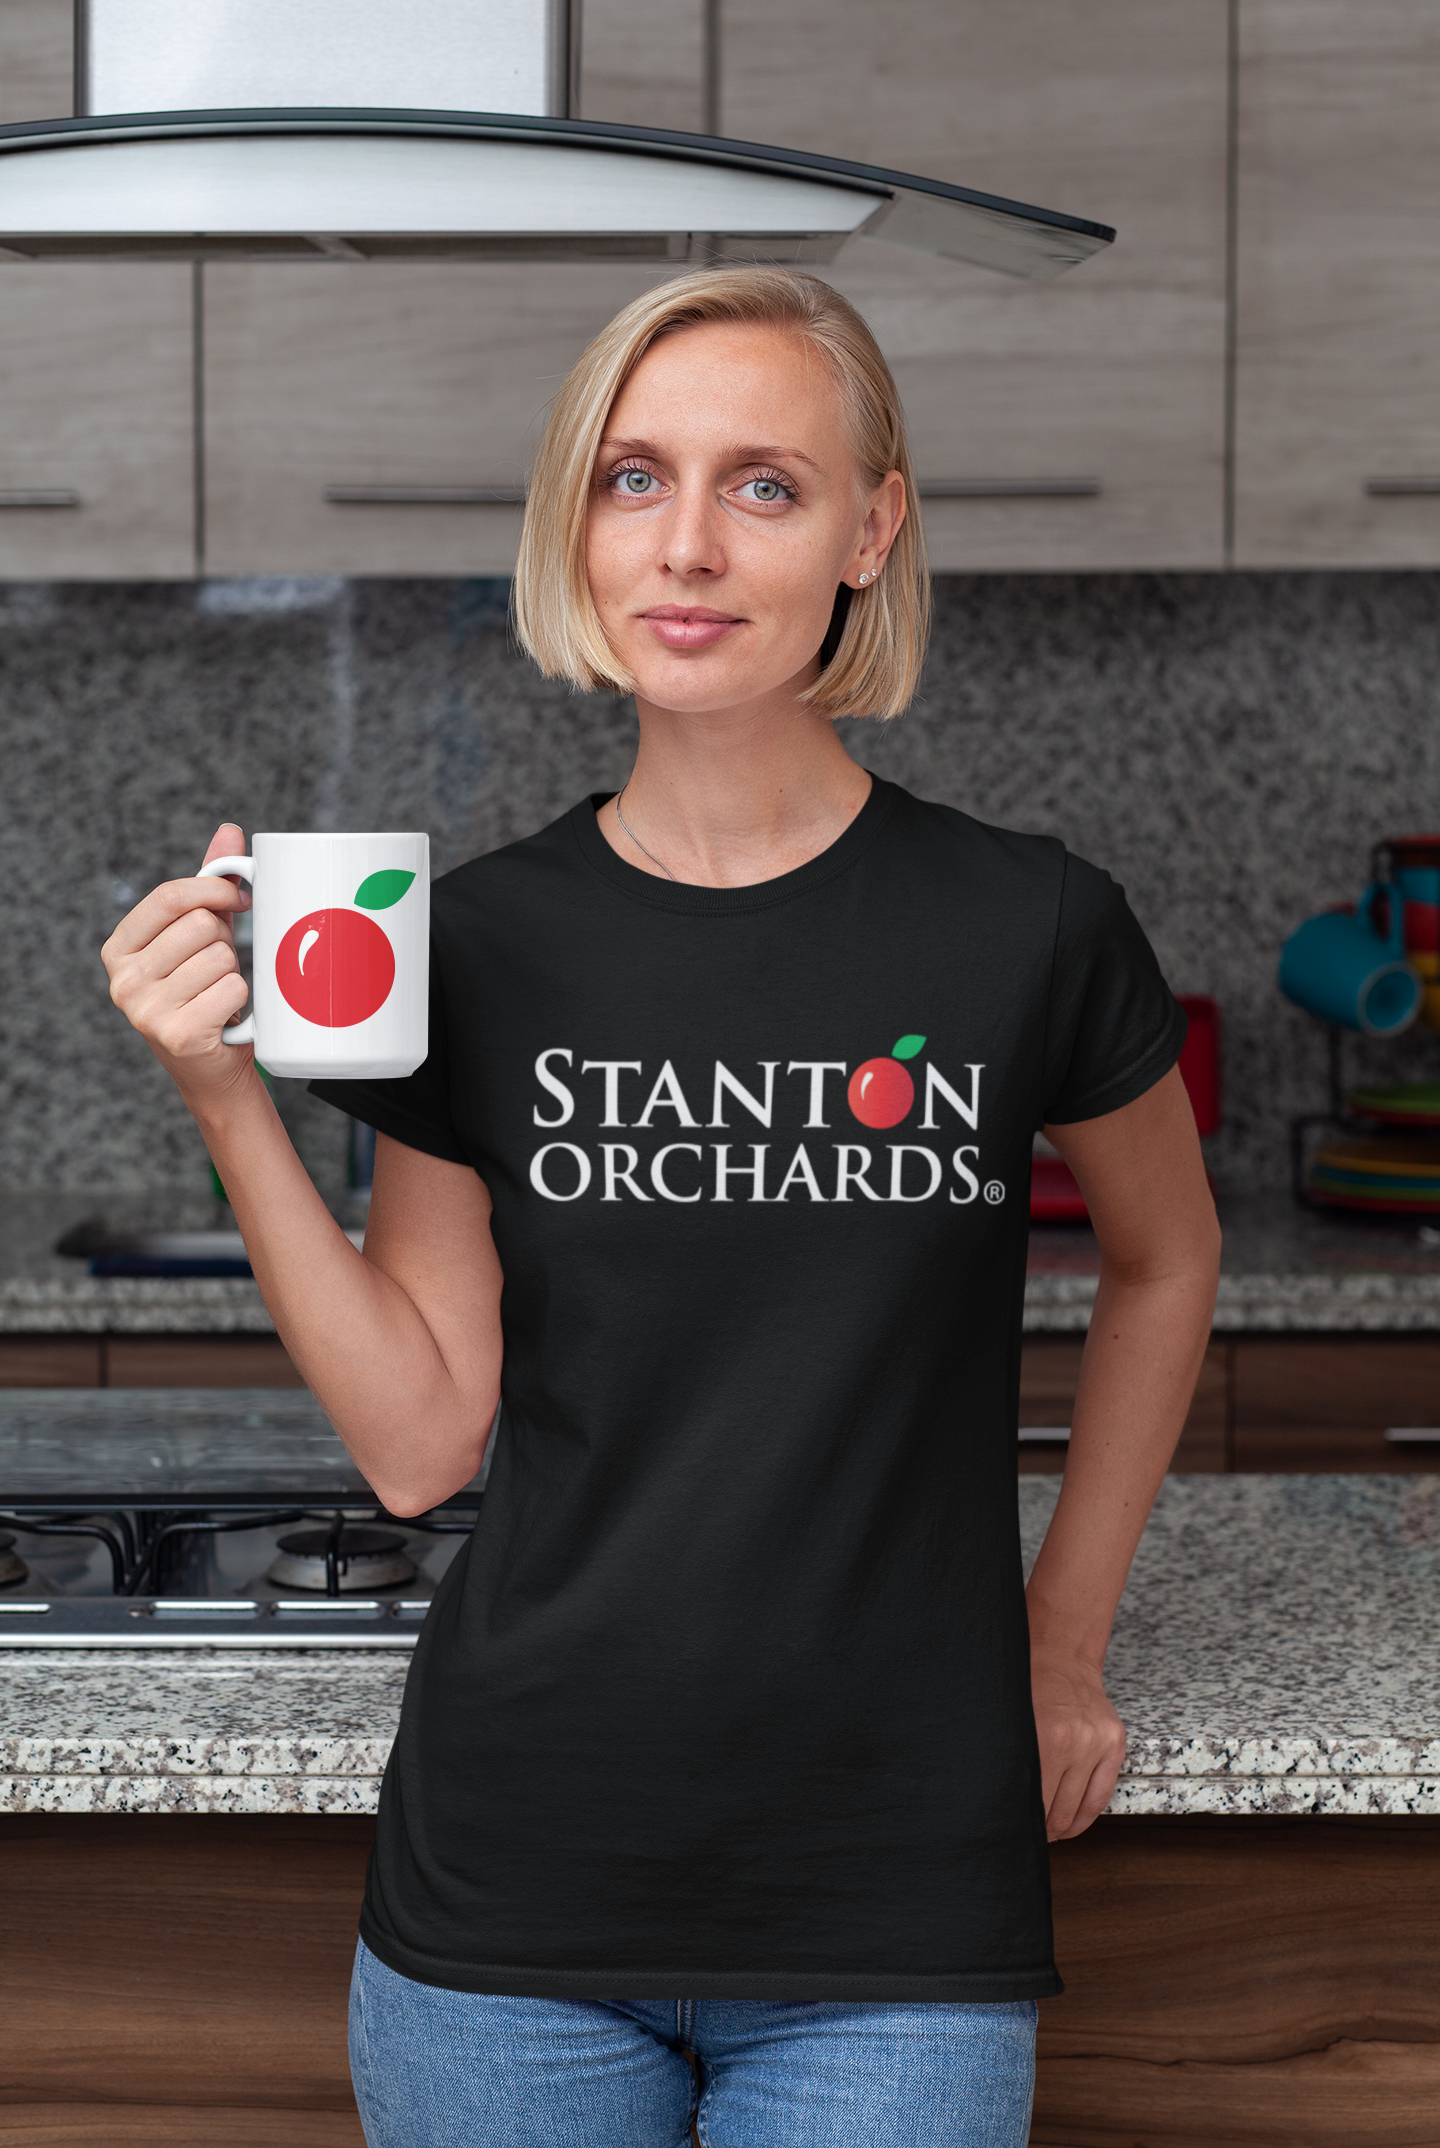 Women's Fashion Fit T-Shirt With Stanton Orchards Logo